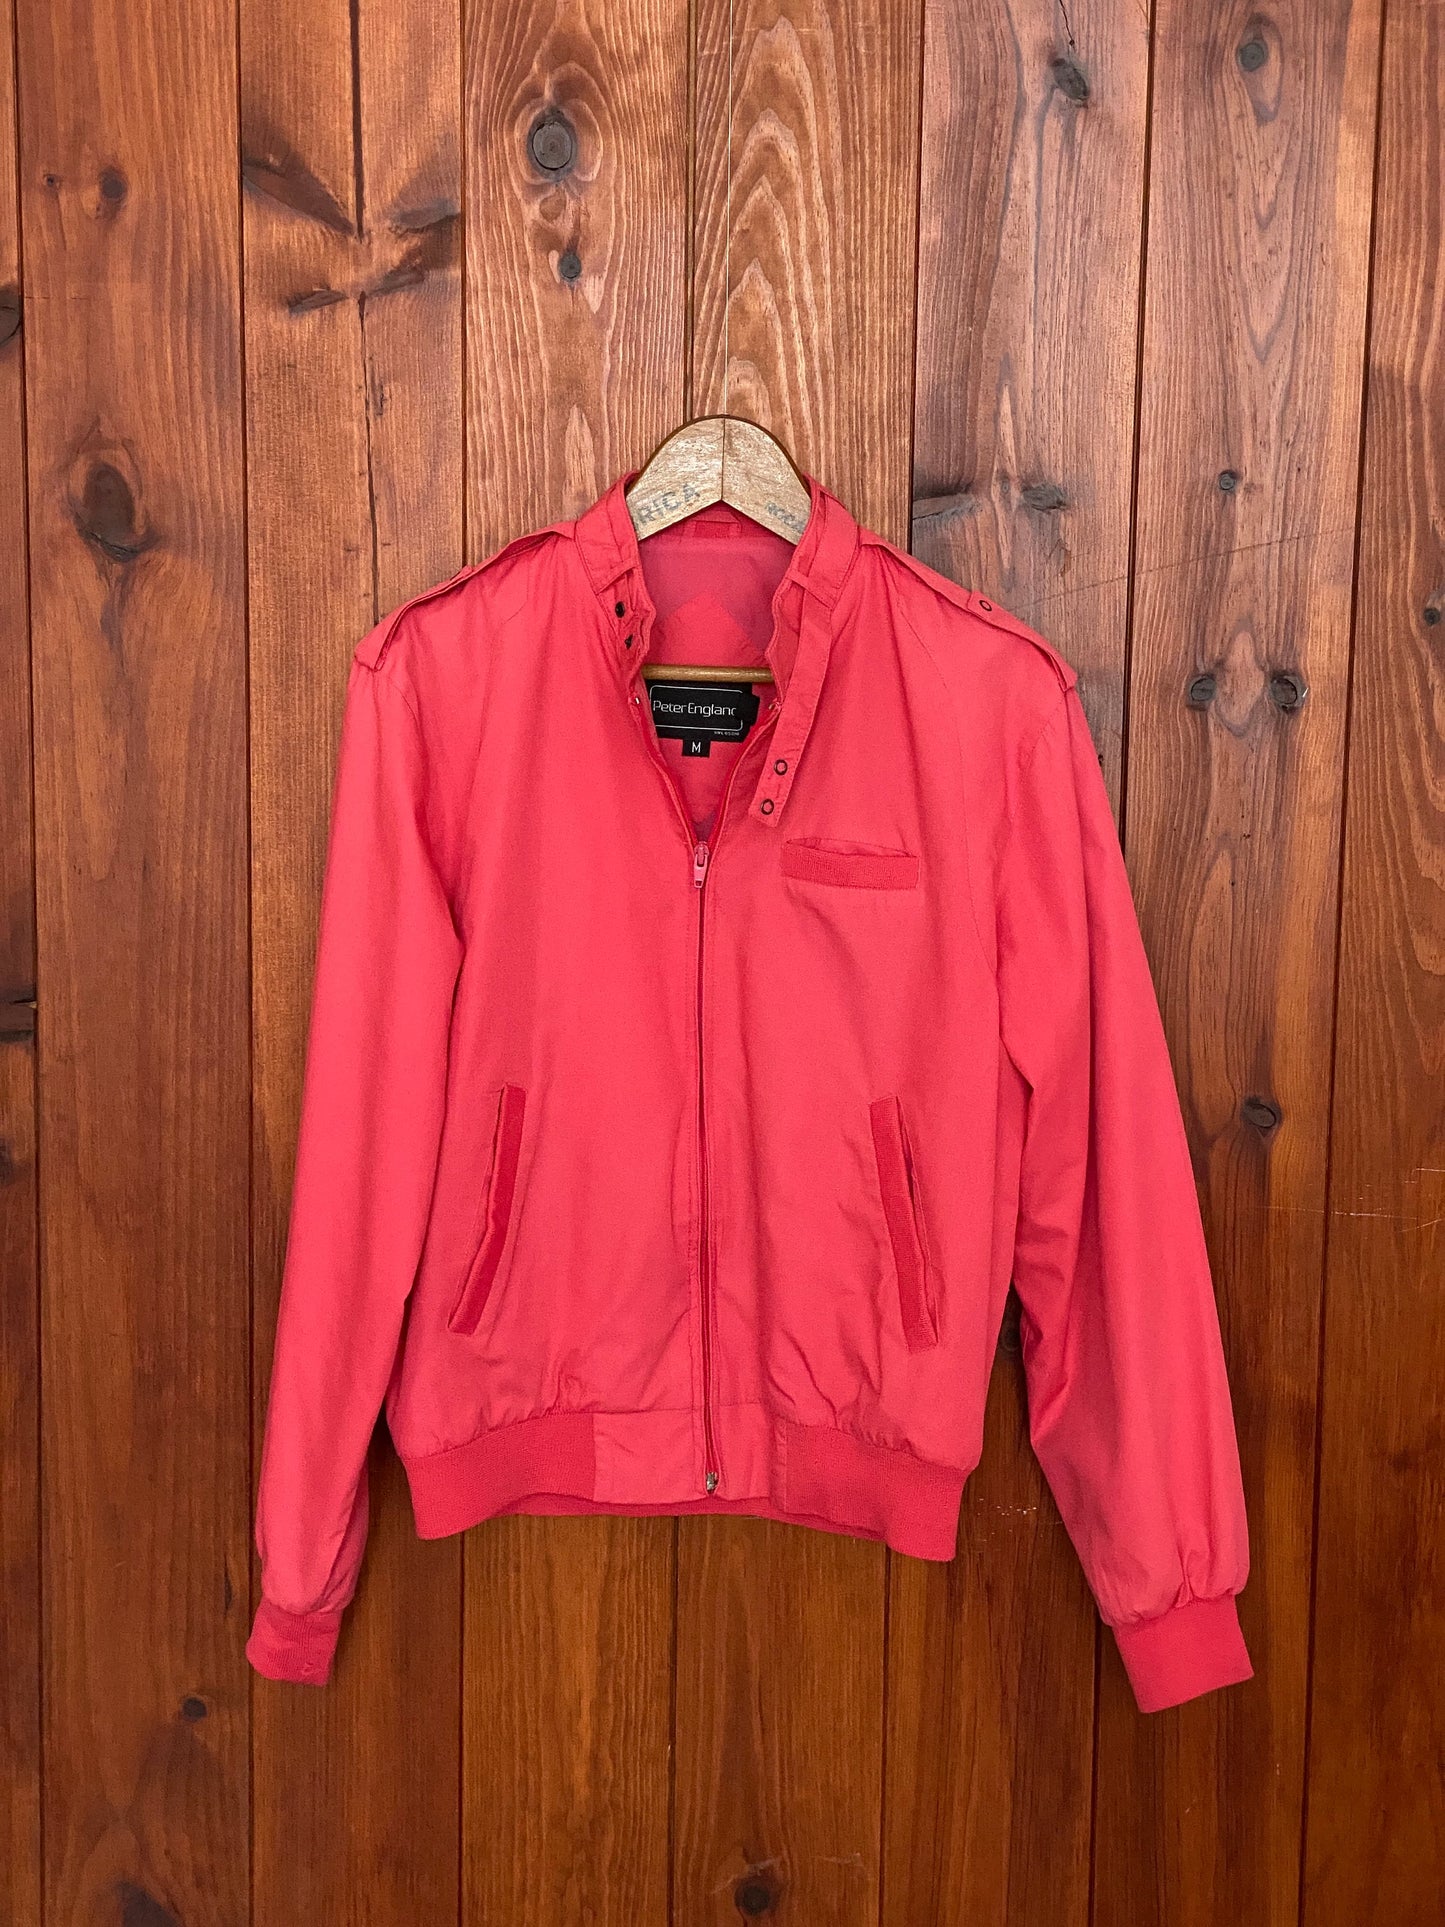 Vintage 80s Members Only style cotton jacket by Peter England, size Medium - Retro fashion with timeless appeal.